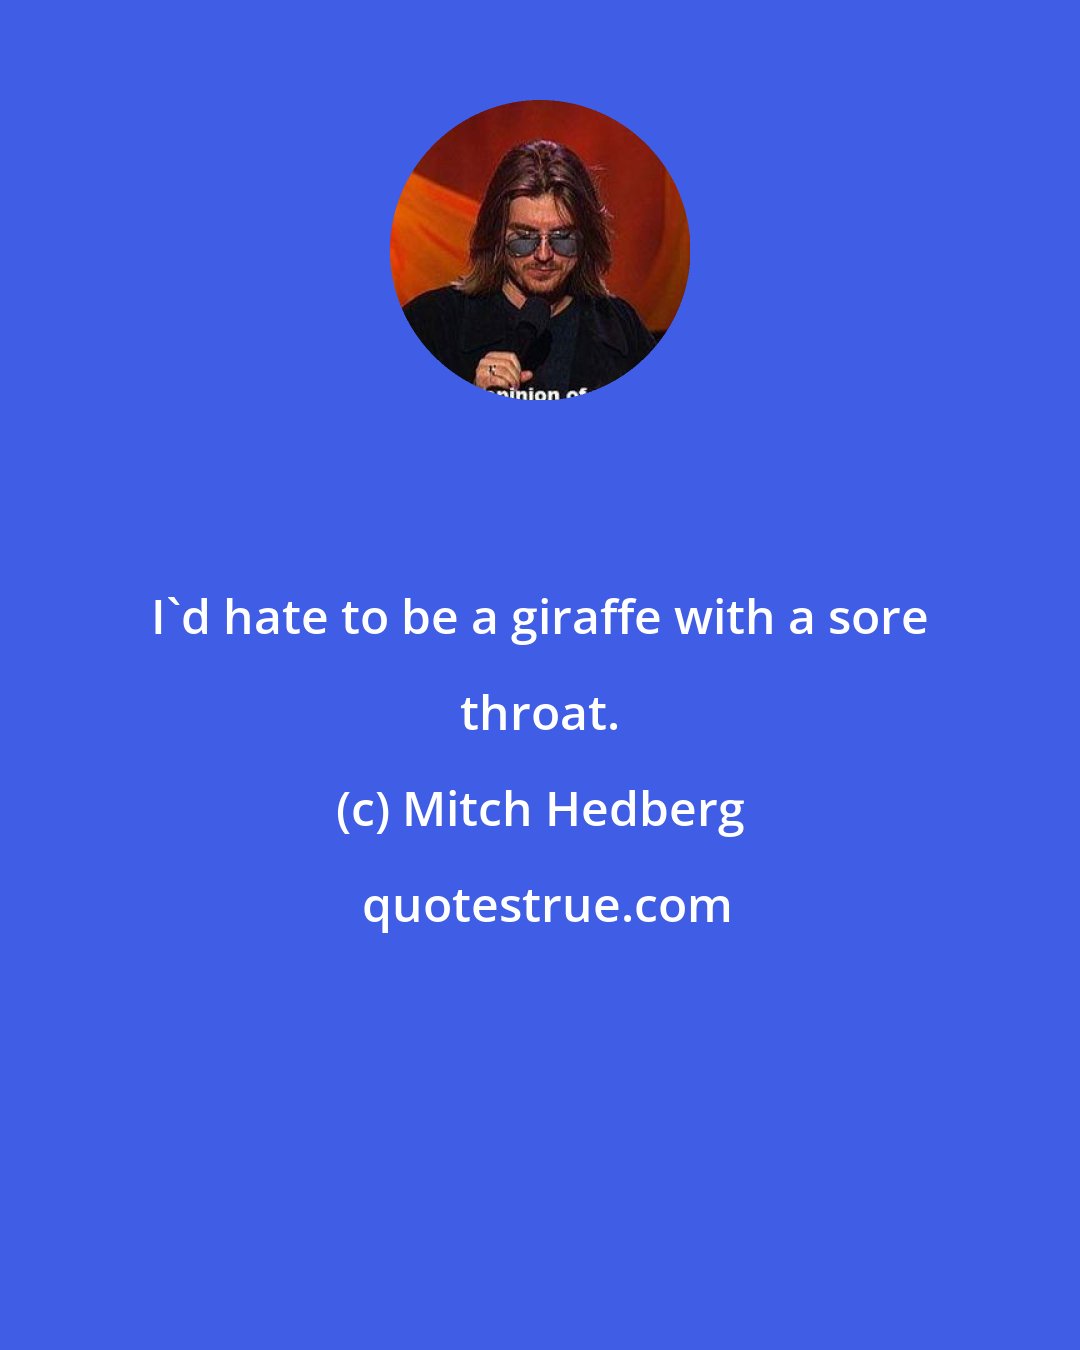 Mitch Hedberg: I'd hate to be a giraffe with a sore throat.